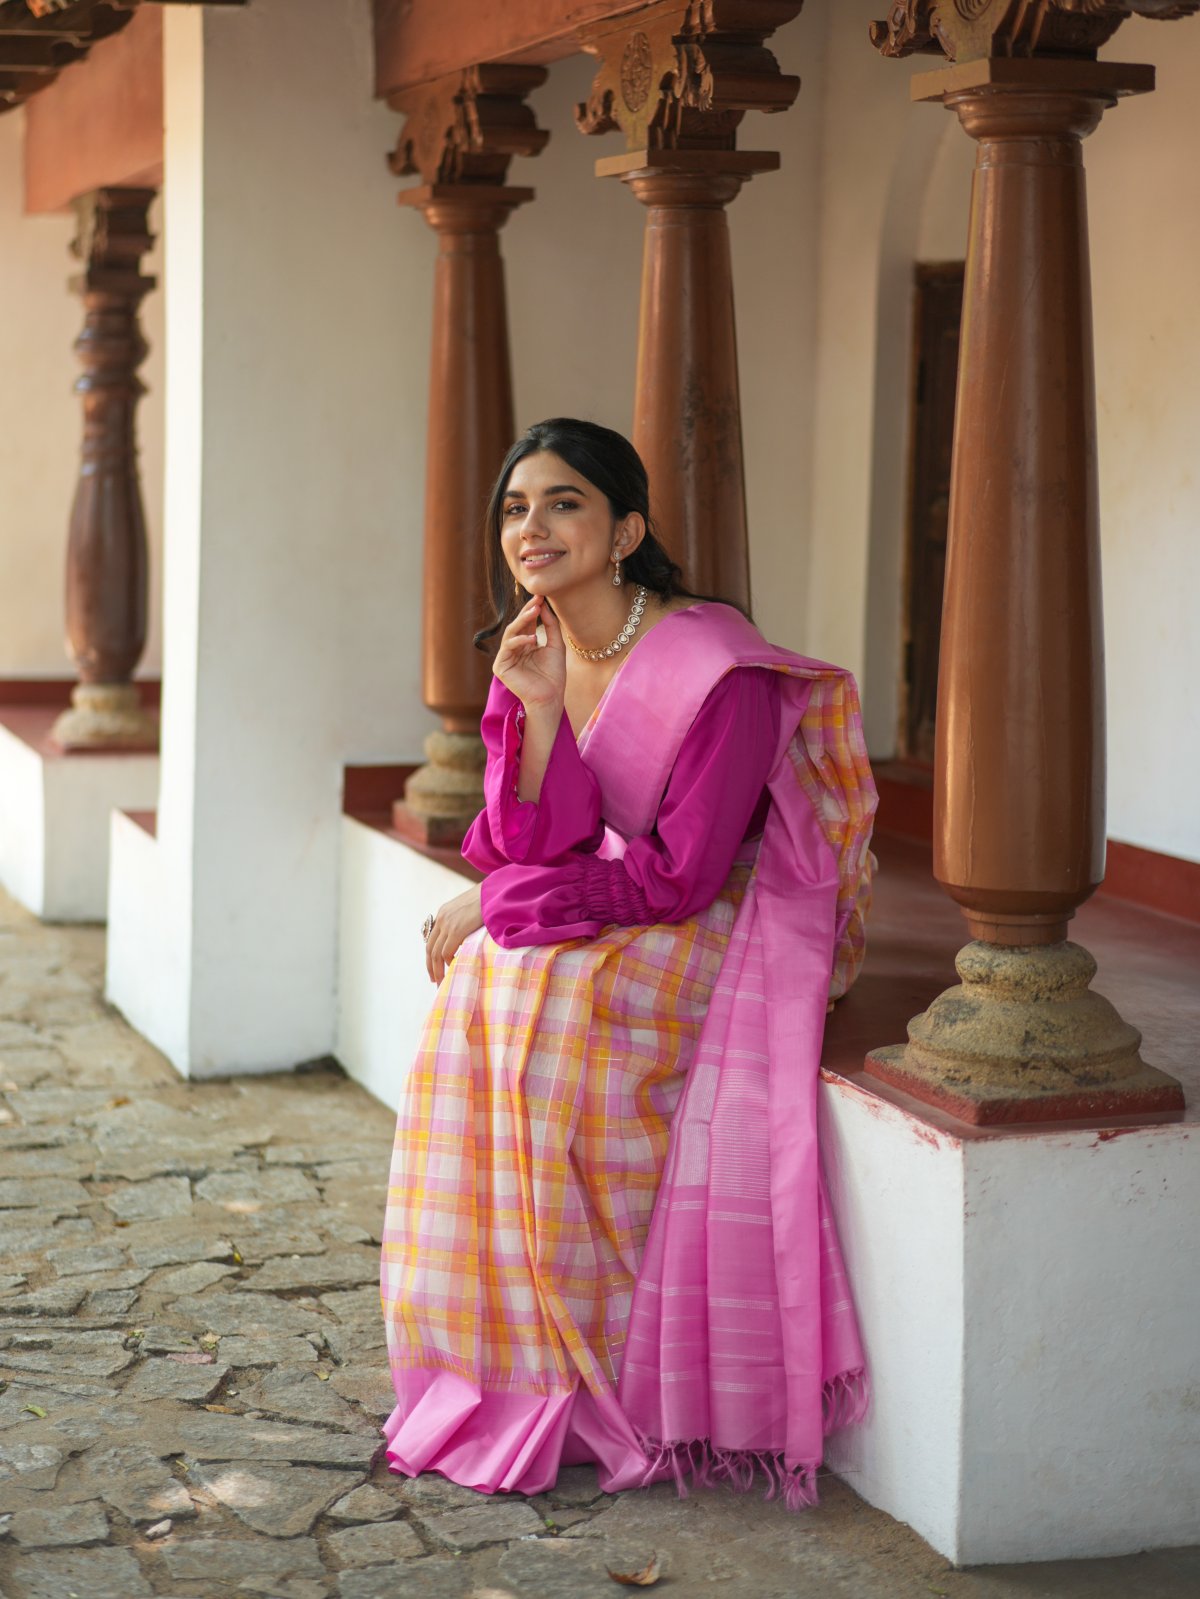 Tulsi Weaves - Bringing You Authentic Handwoven Silks